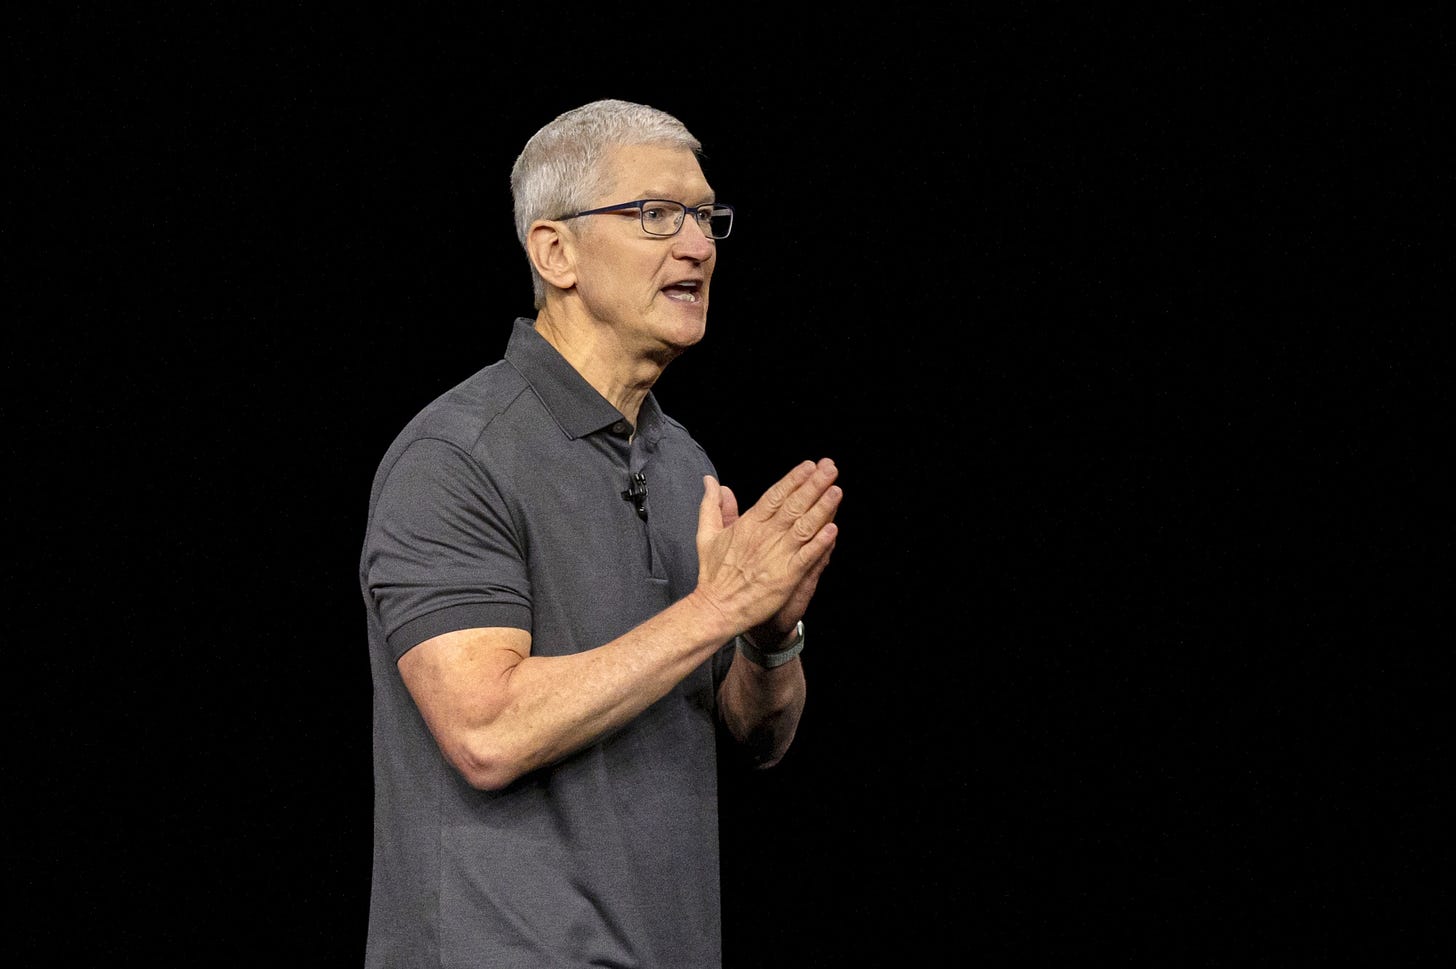 CEO Tim Cook has said that Apple’s in-house chips will give it an advantage in AI.